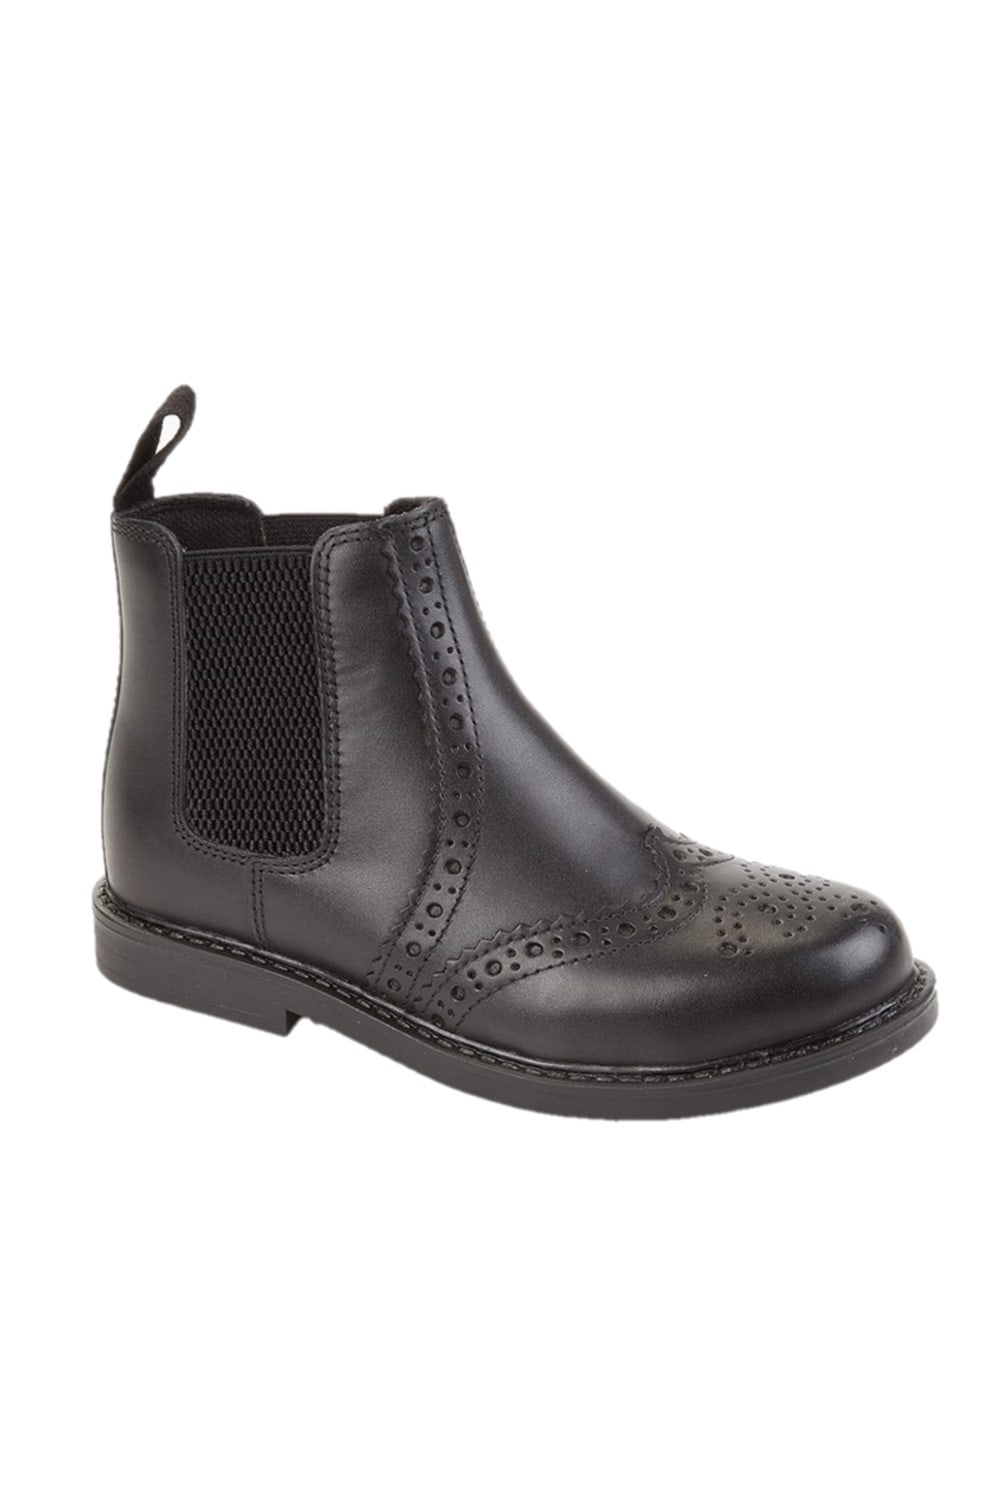 Roamers Boys Leather Ankle Boots